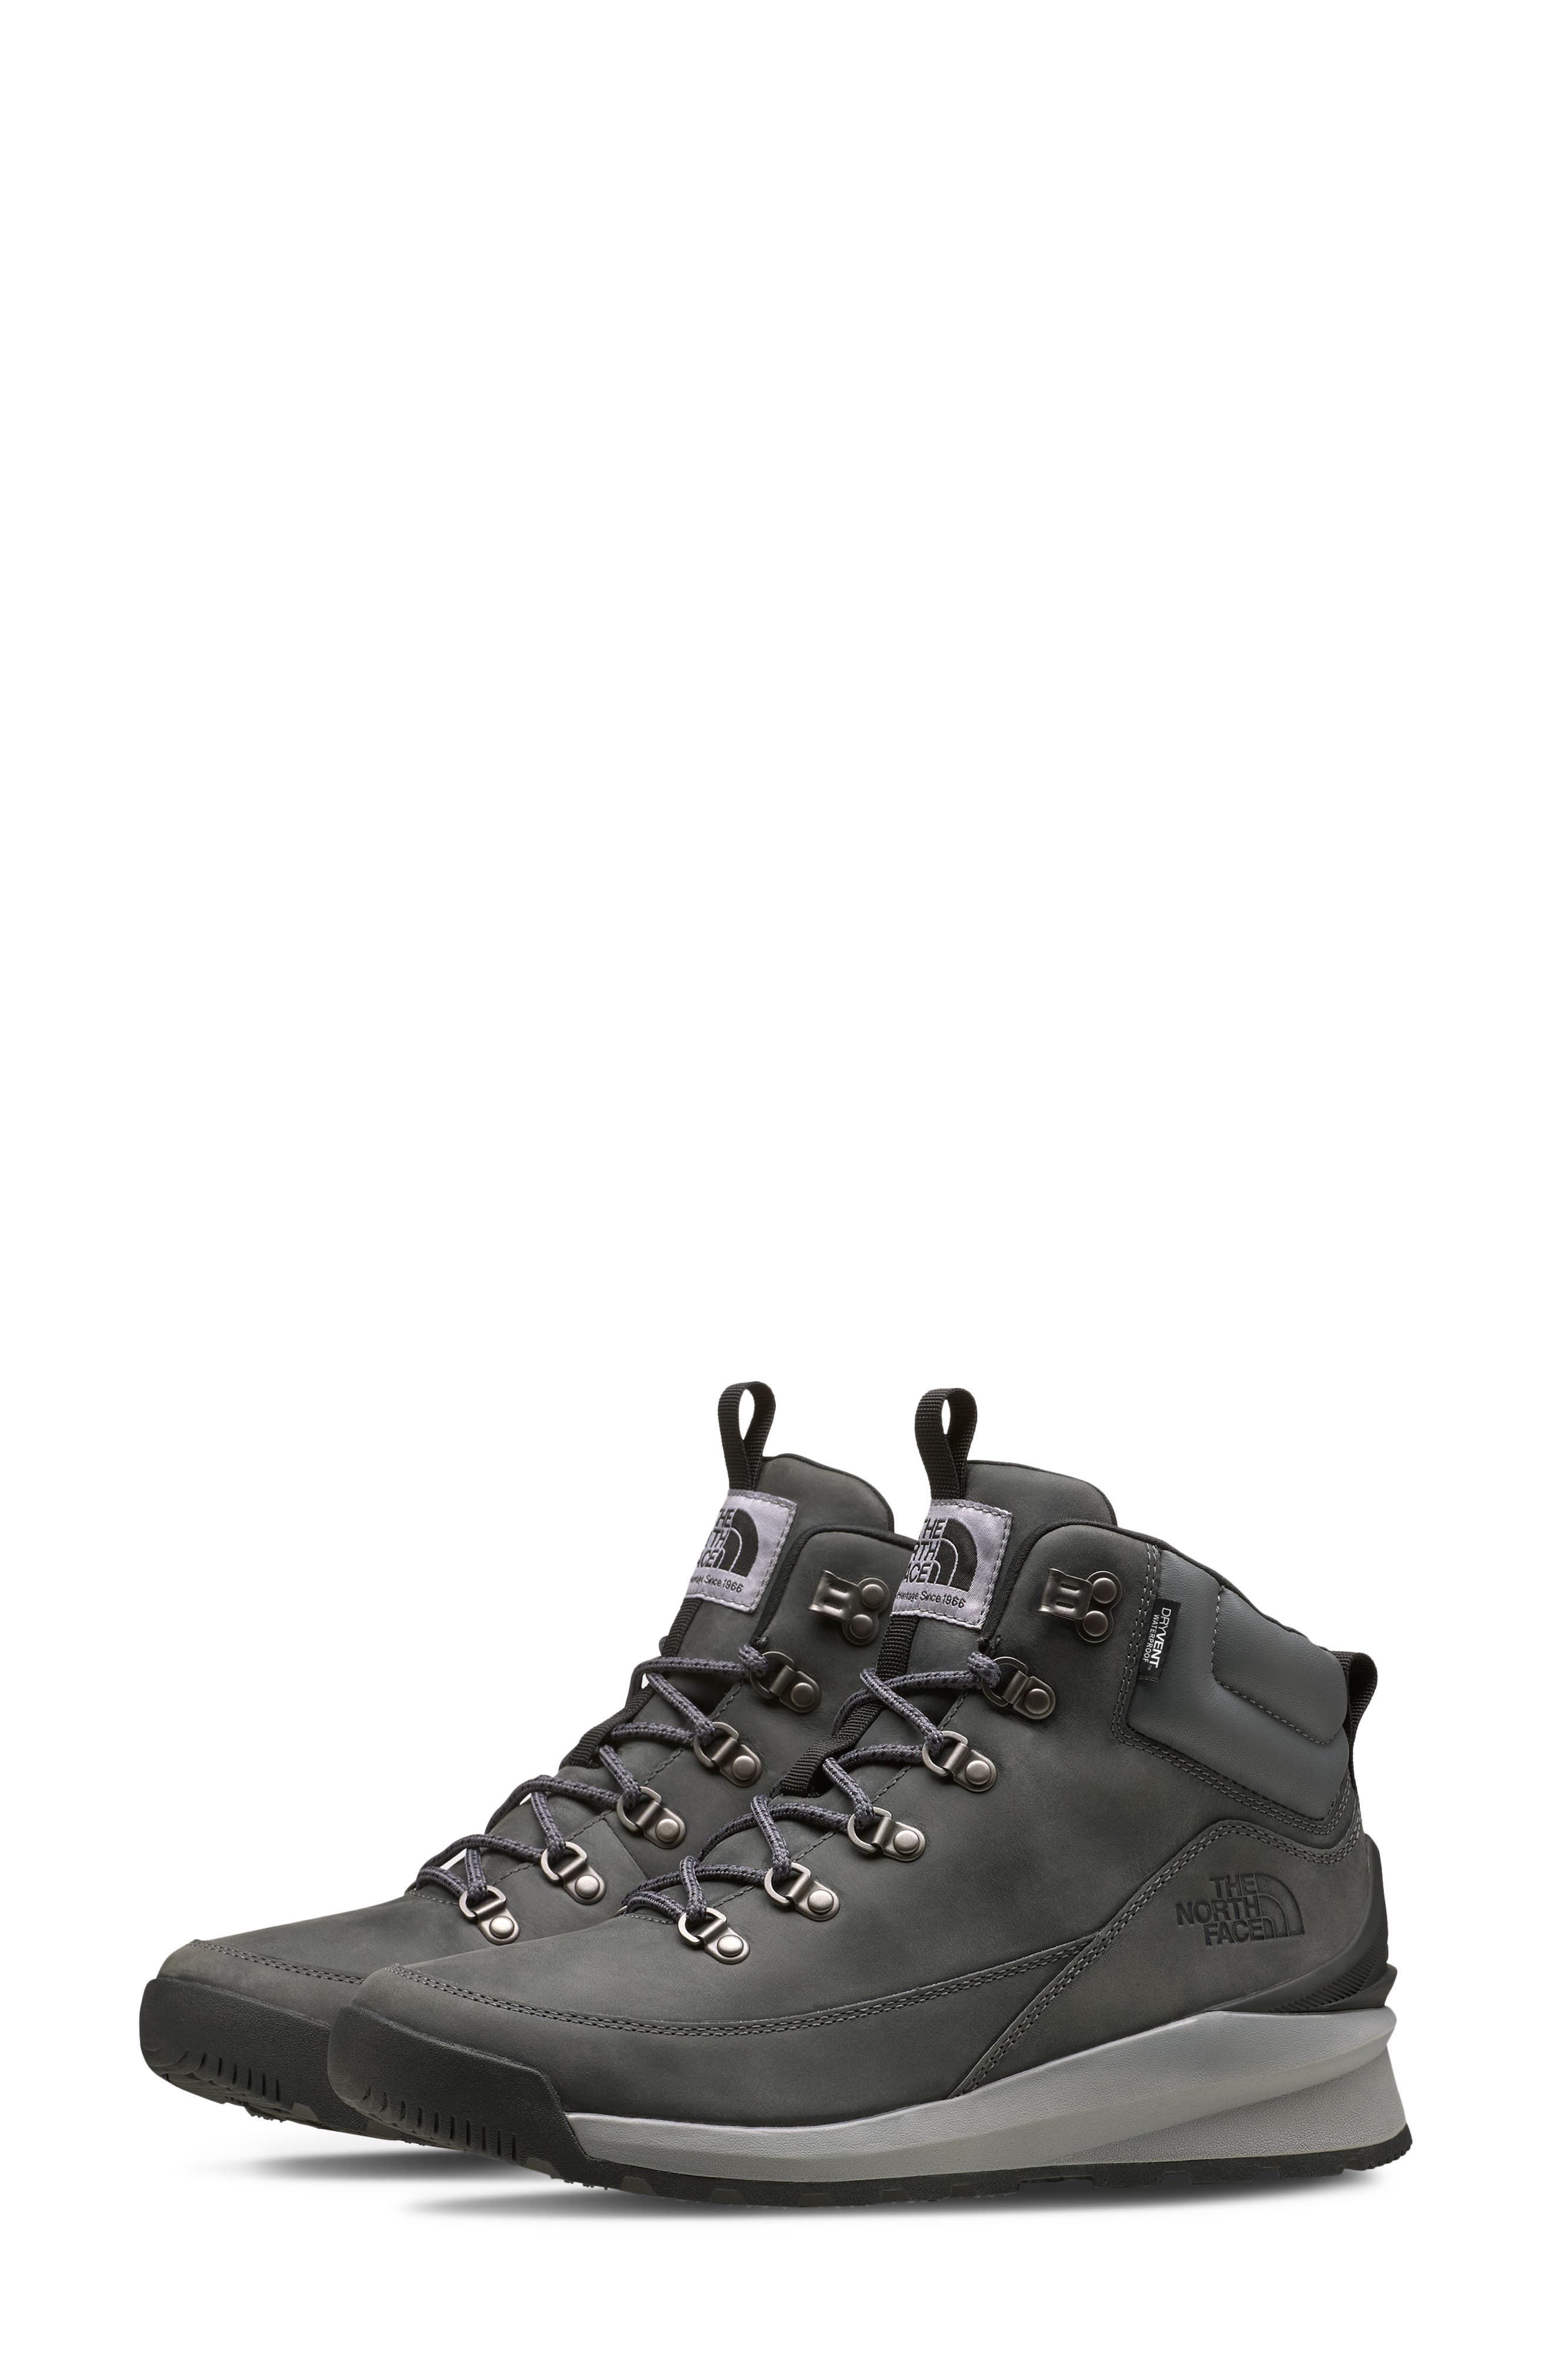 north face grey boots